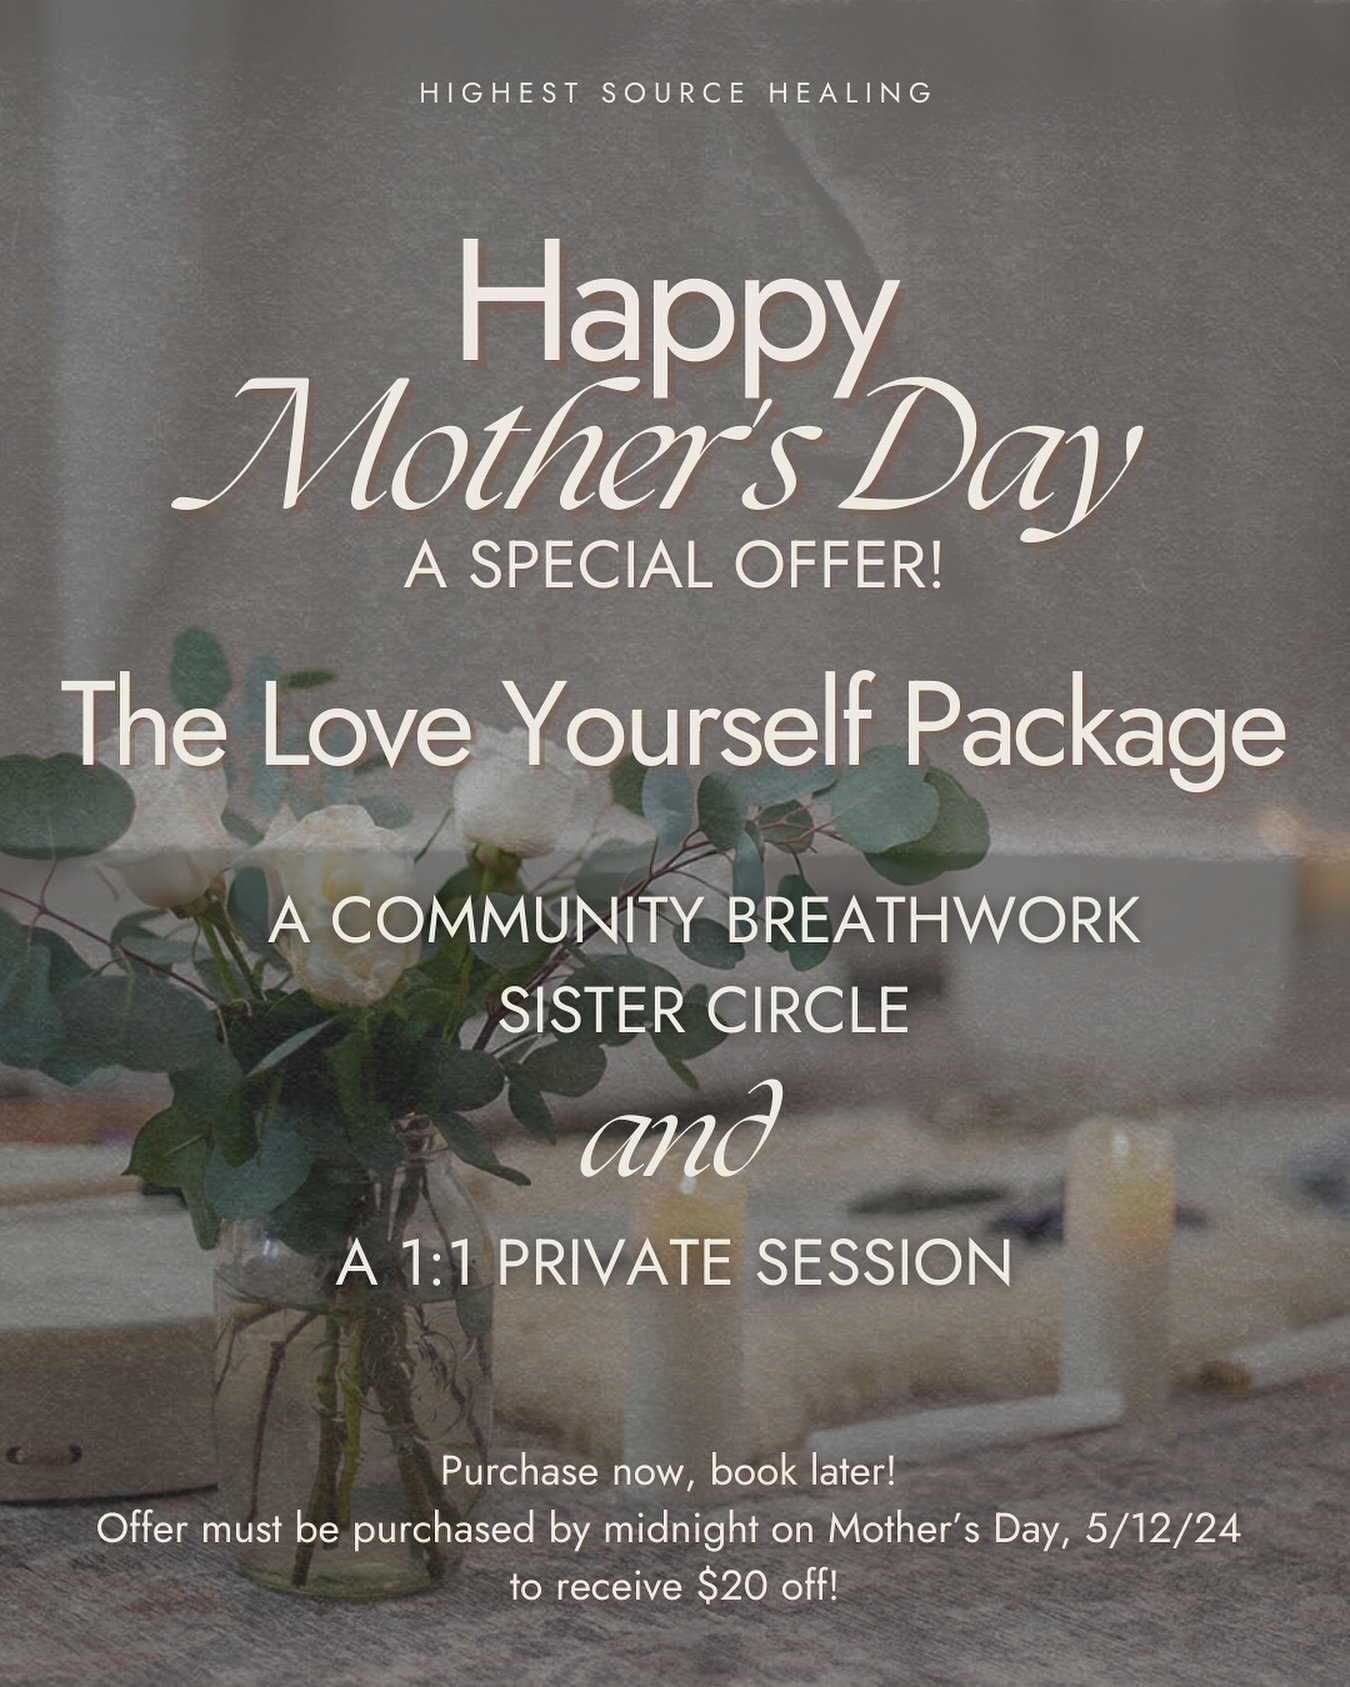 🌸 A Special Offer For Yourself or Gift To A Mom You Love! 🌸

The Love Yourself Package includes:
✨ A Community Breathwork Sister Circle
AND
✨ A 1:1 Private Session 
( Breathwork or Reiki)

Purchase now &amp; book later! Offer must be purchased by m